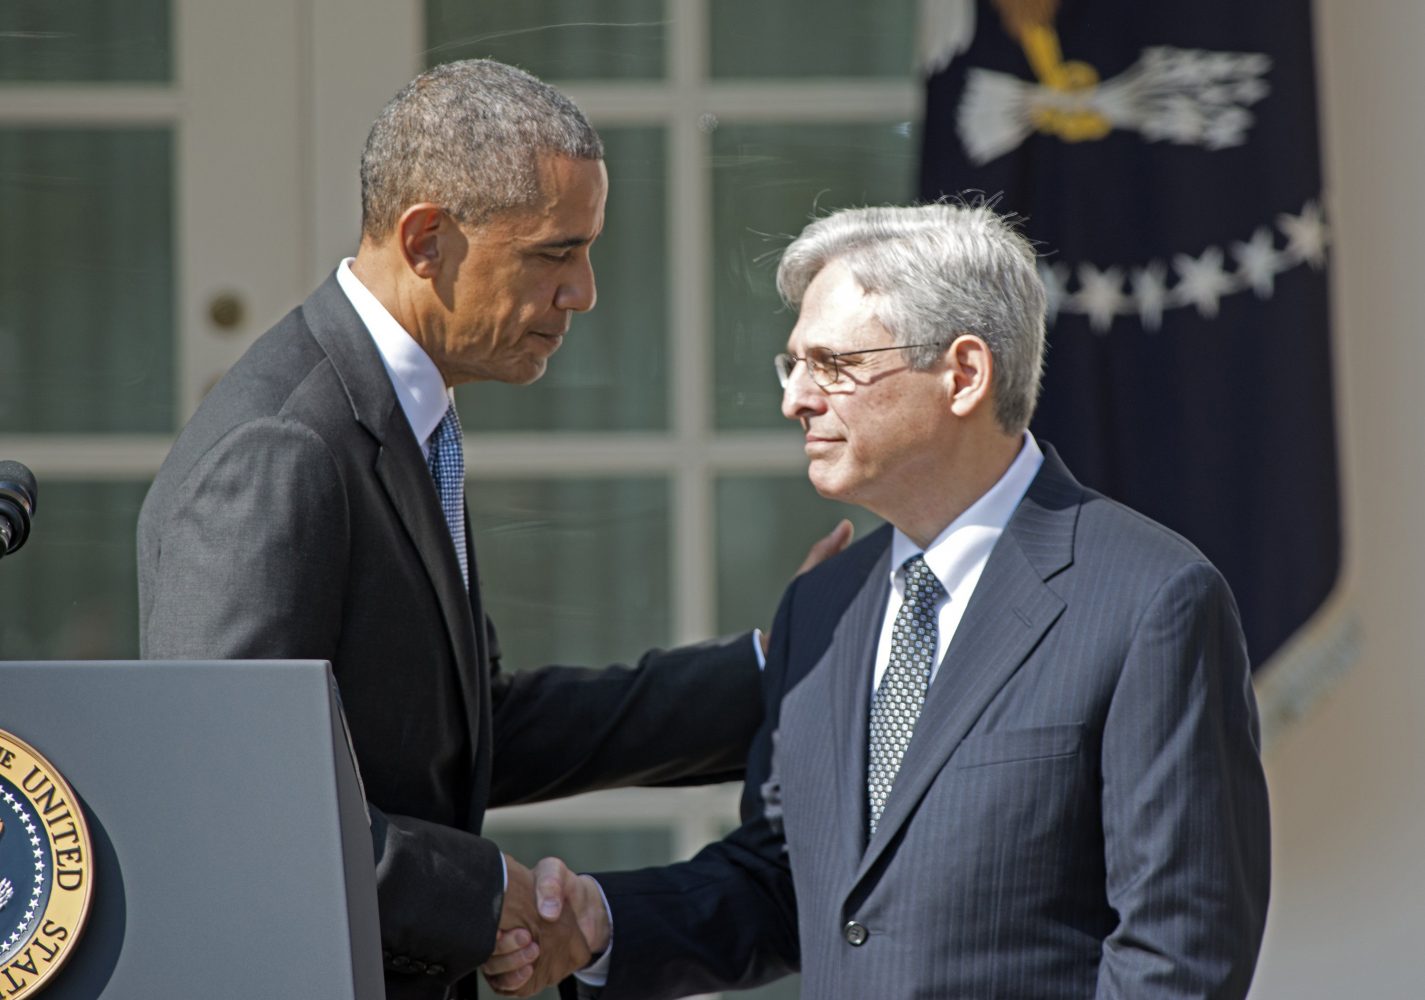 President Barack Obama, left, shakes hands with Judge Merrick Garland, chief justice for the U.S. Court of Appeals for the District of Columbia Circuit, right, after announcing him as his nominee for the Supreme Court in the Rose Garden of the White House on Wednesday, March 16, 2016. (Ron Sachs/CNP/Sipa USA/TNS)